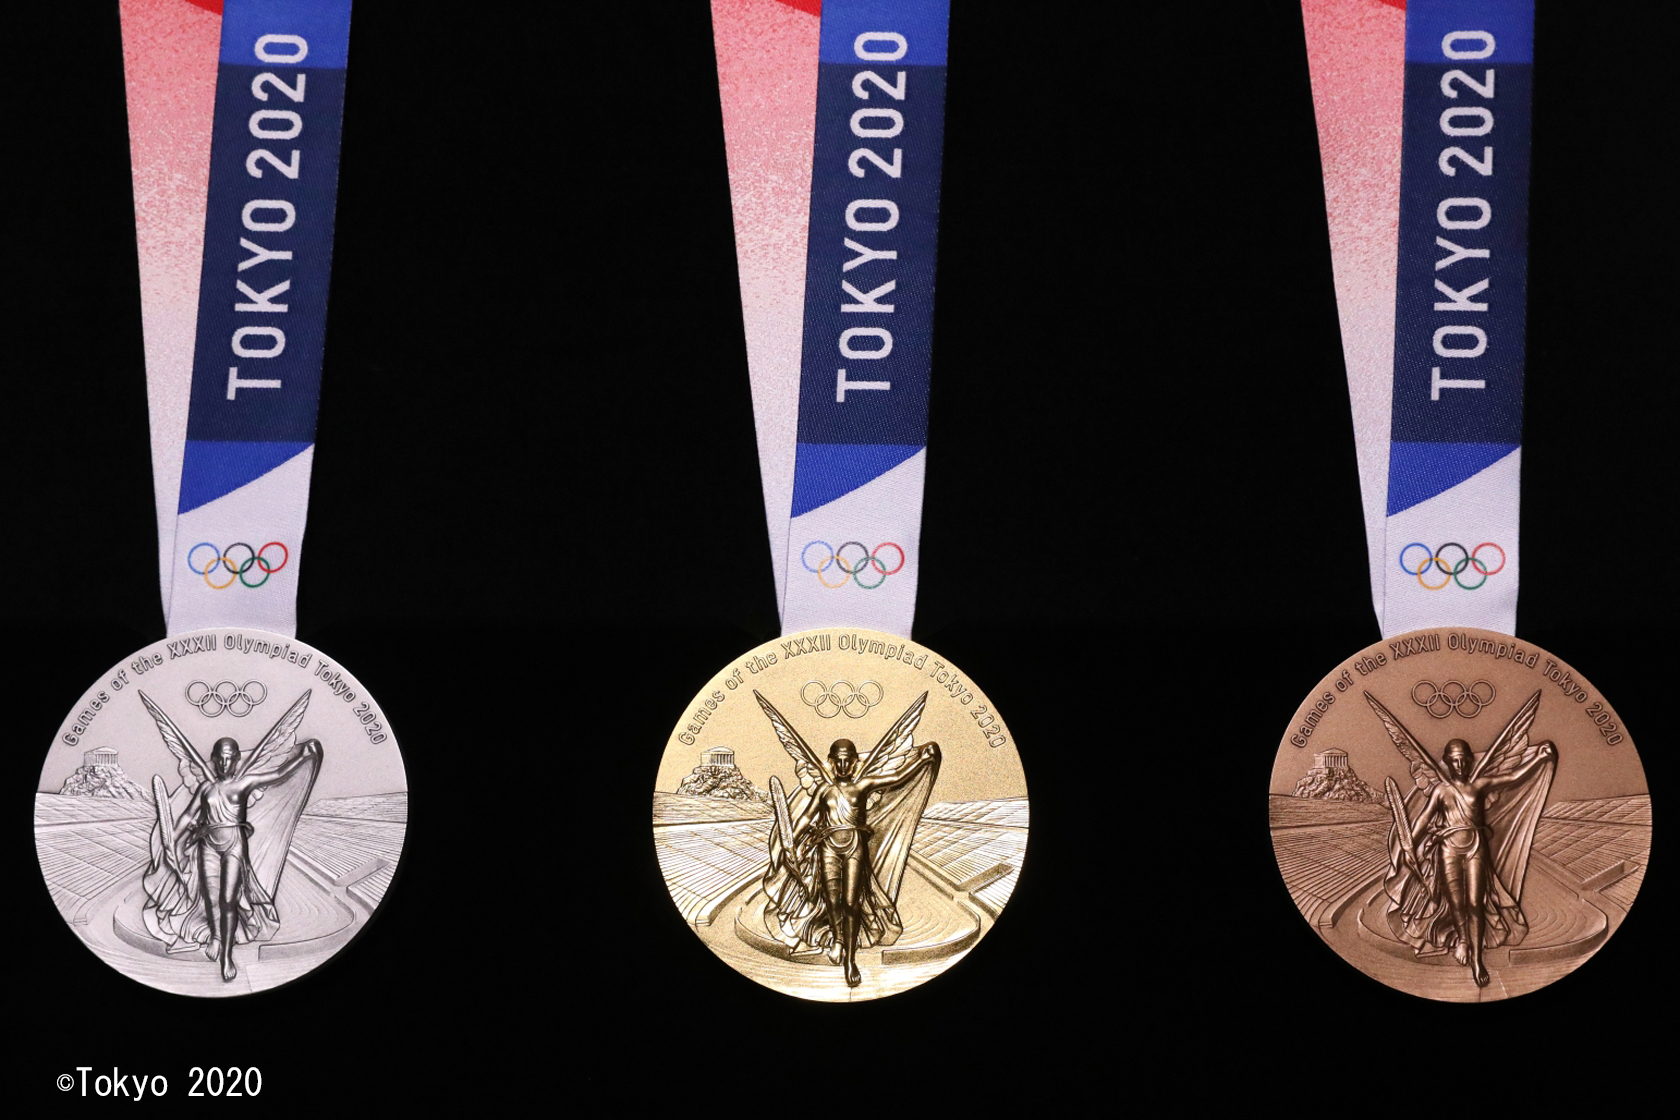 Tokyo 2020 Olympic medals front